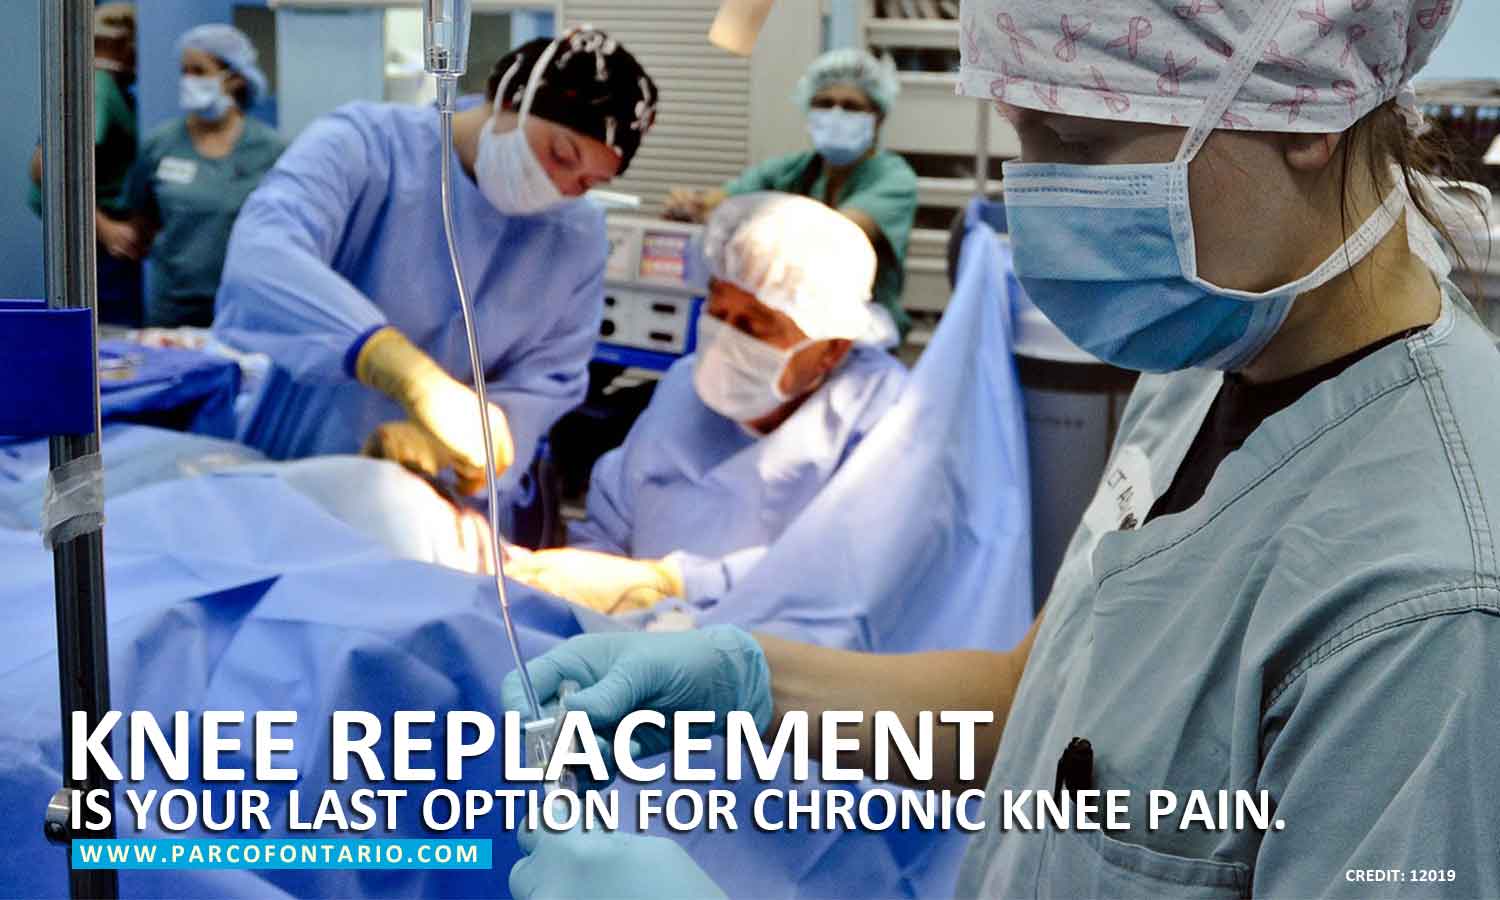 Knee replacement is your last option